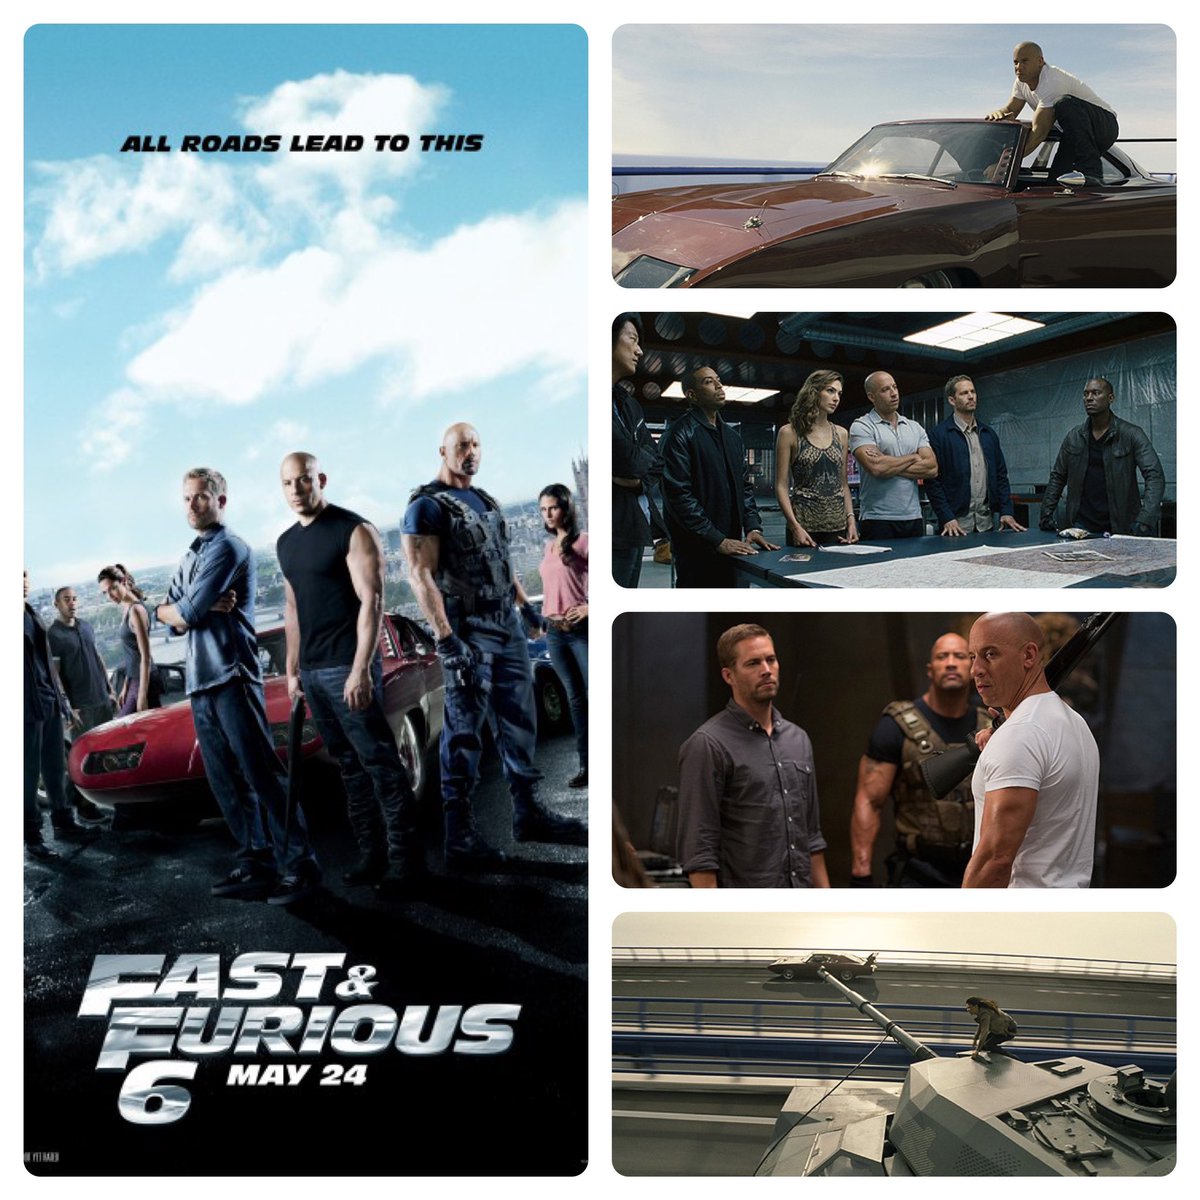 Fast & Furious 6 celebrates 11th anniversary today. #fastandfurious6 #vindiesel #vindiesellovers #vindieselfans #vindieselforeverfastfamily #dominictoretto #domtoretto #paulwalker #paulwalkerfans #paulwalkerlove #paulwalkermovies #dwaynejohnson #dwaynejohnsonfans #universal